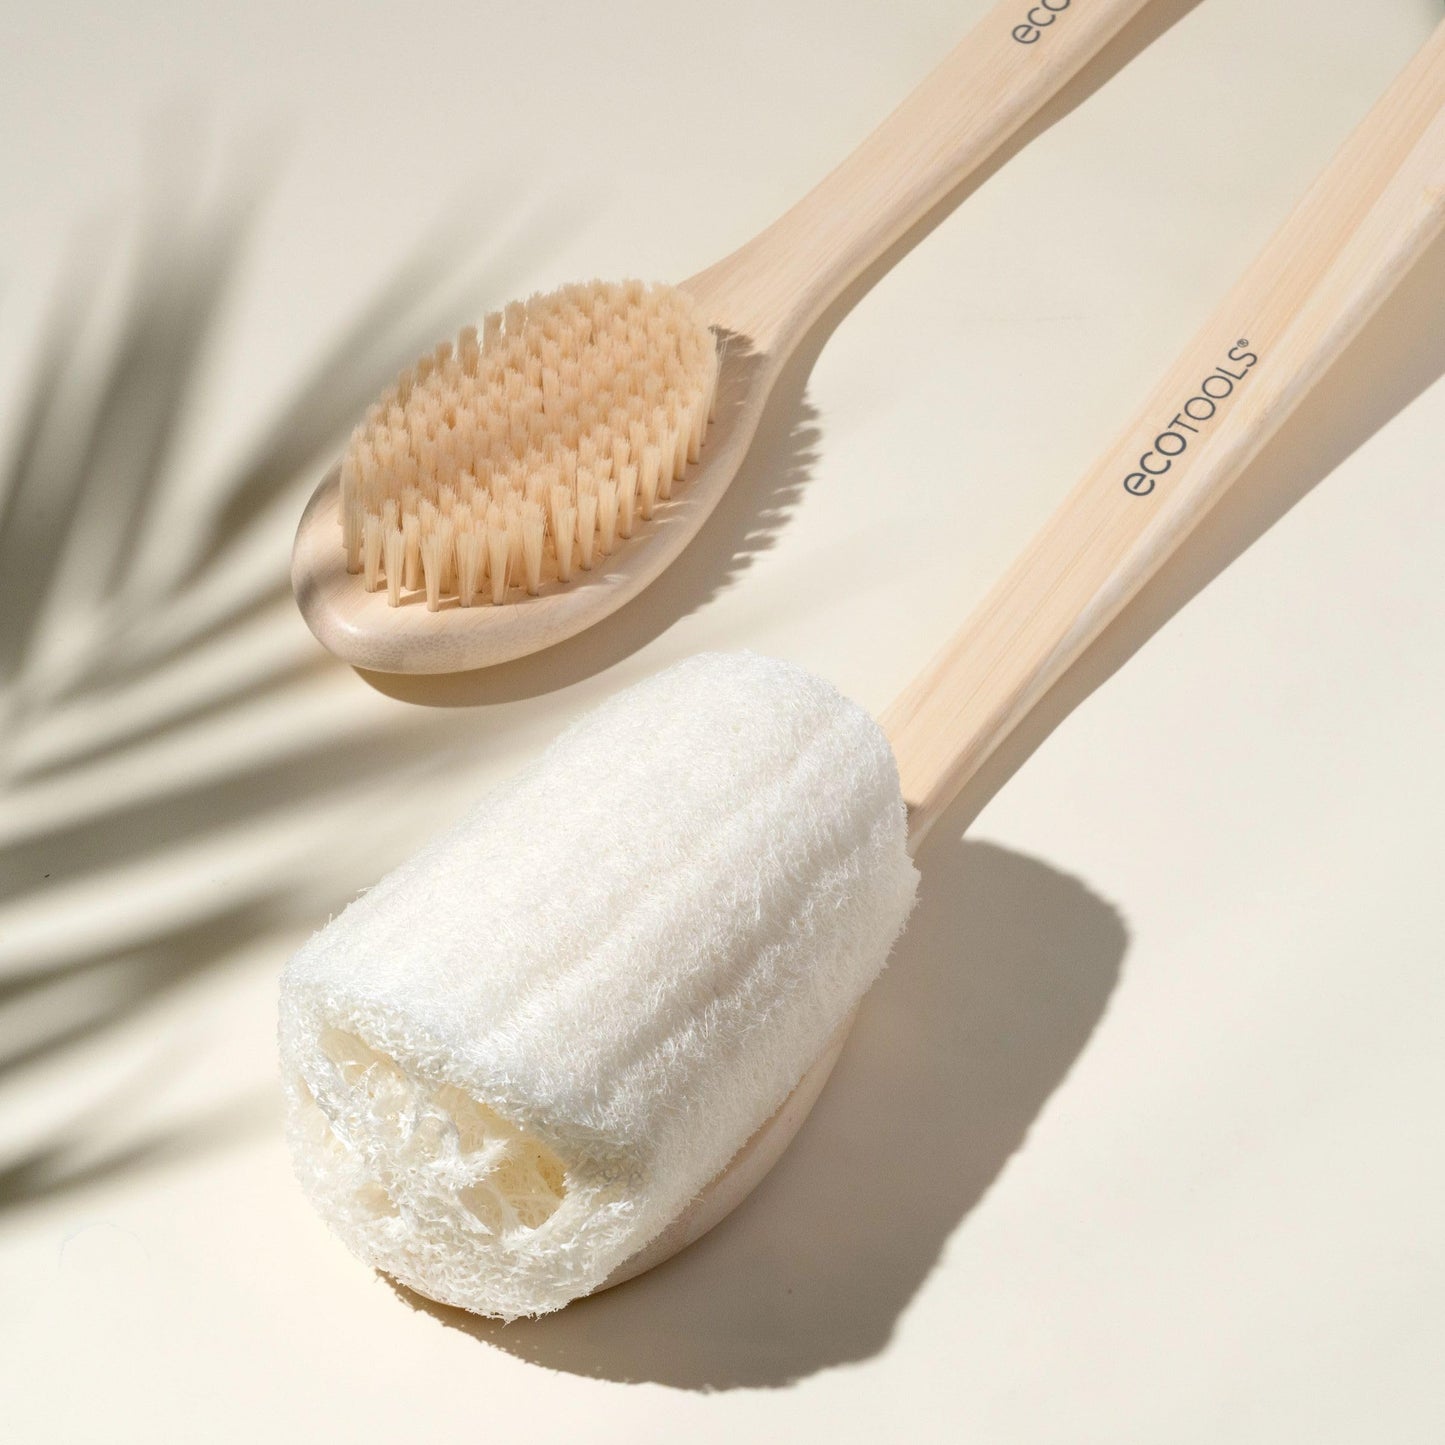 EcoTools Loofah Bath Brush, Shower Brush with Ergonomic Handle, Cleans Hard to Reach Areas, Plant-Based, Eco-Friendly Bath Sponge, Gently Cleanses & Exfoliates, Vegan & Cruelty-Free, 2 Count